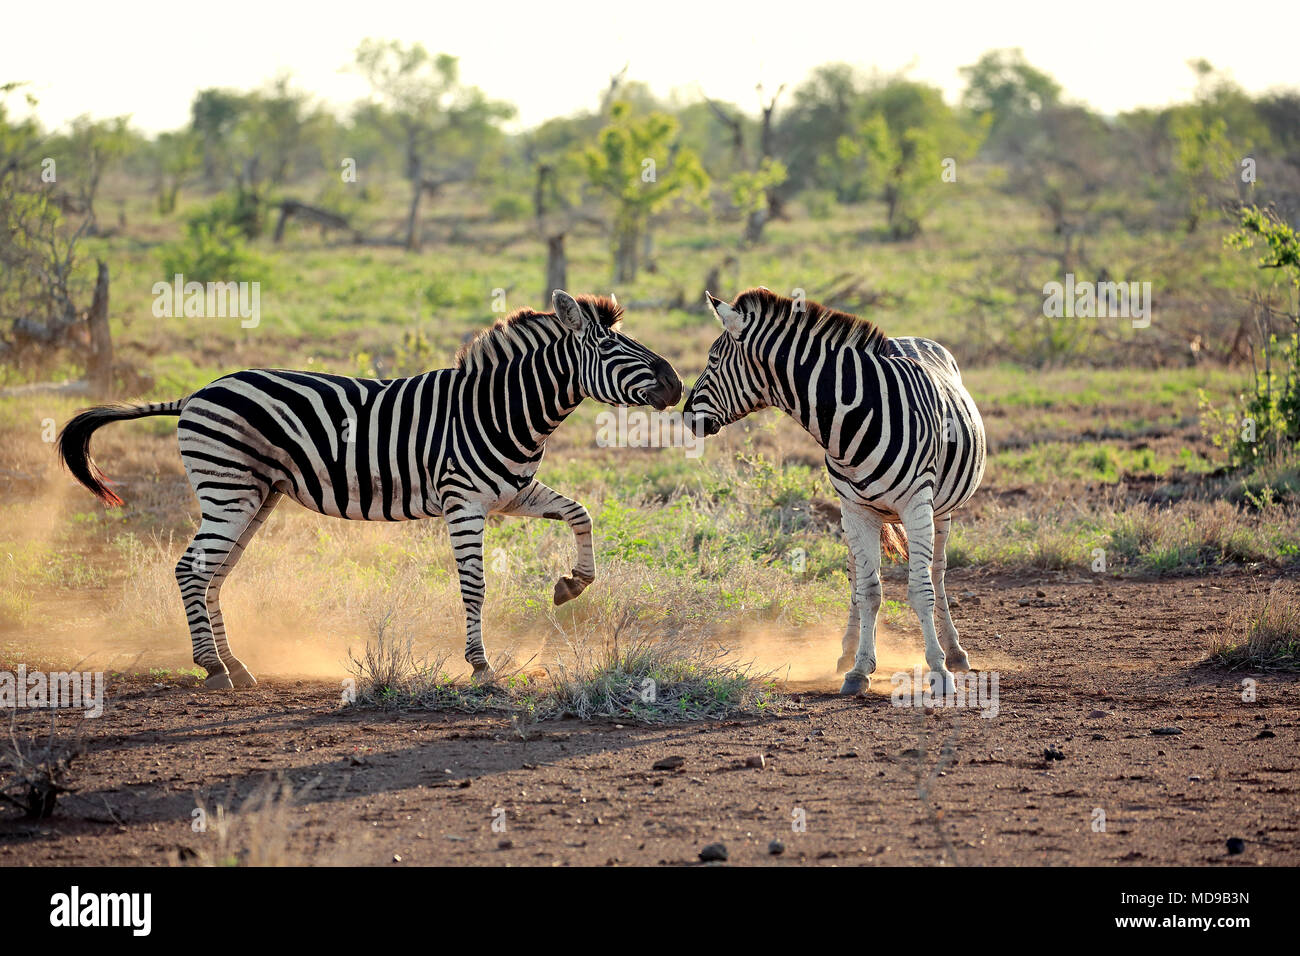 Burchell's Zebras (Equus quagga burchelli), adult, two males fighting, social behavior, Kruger National Park, South Africa Stock Photo